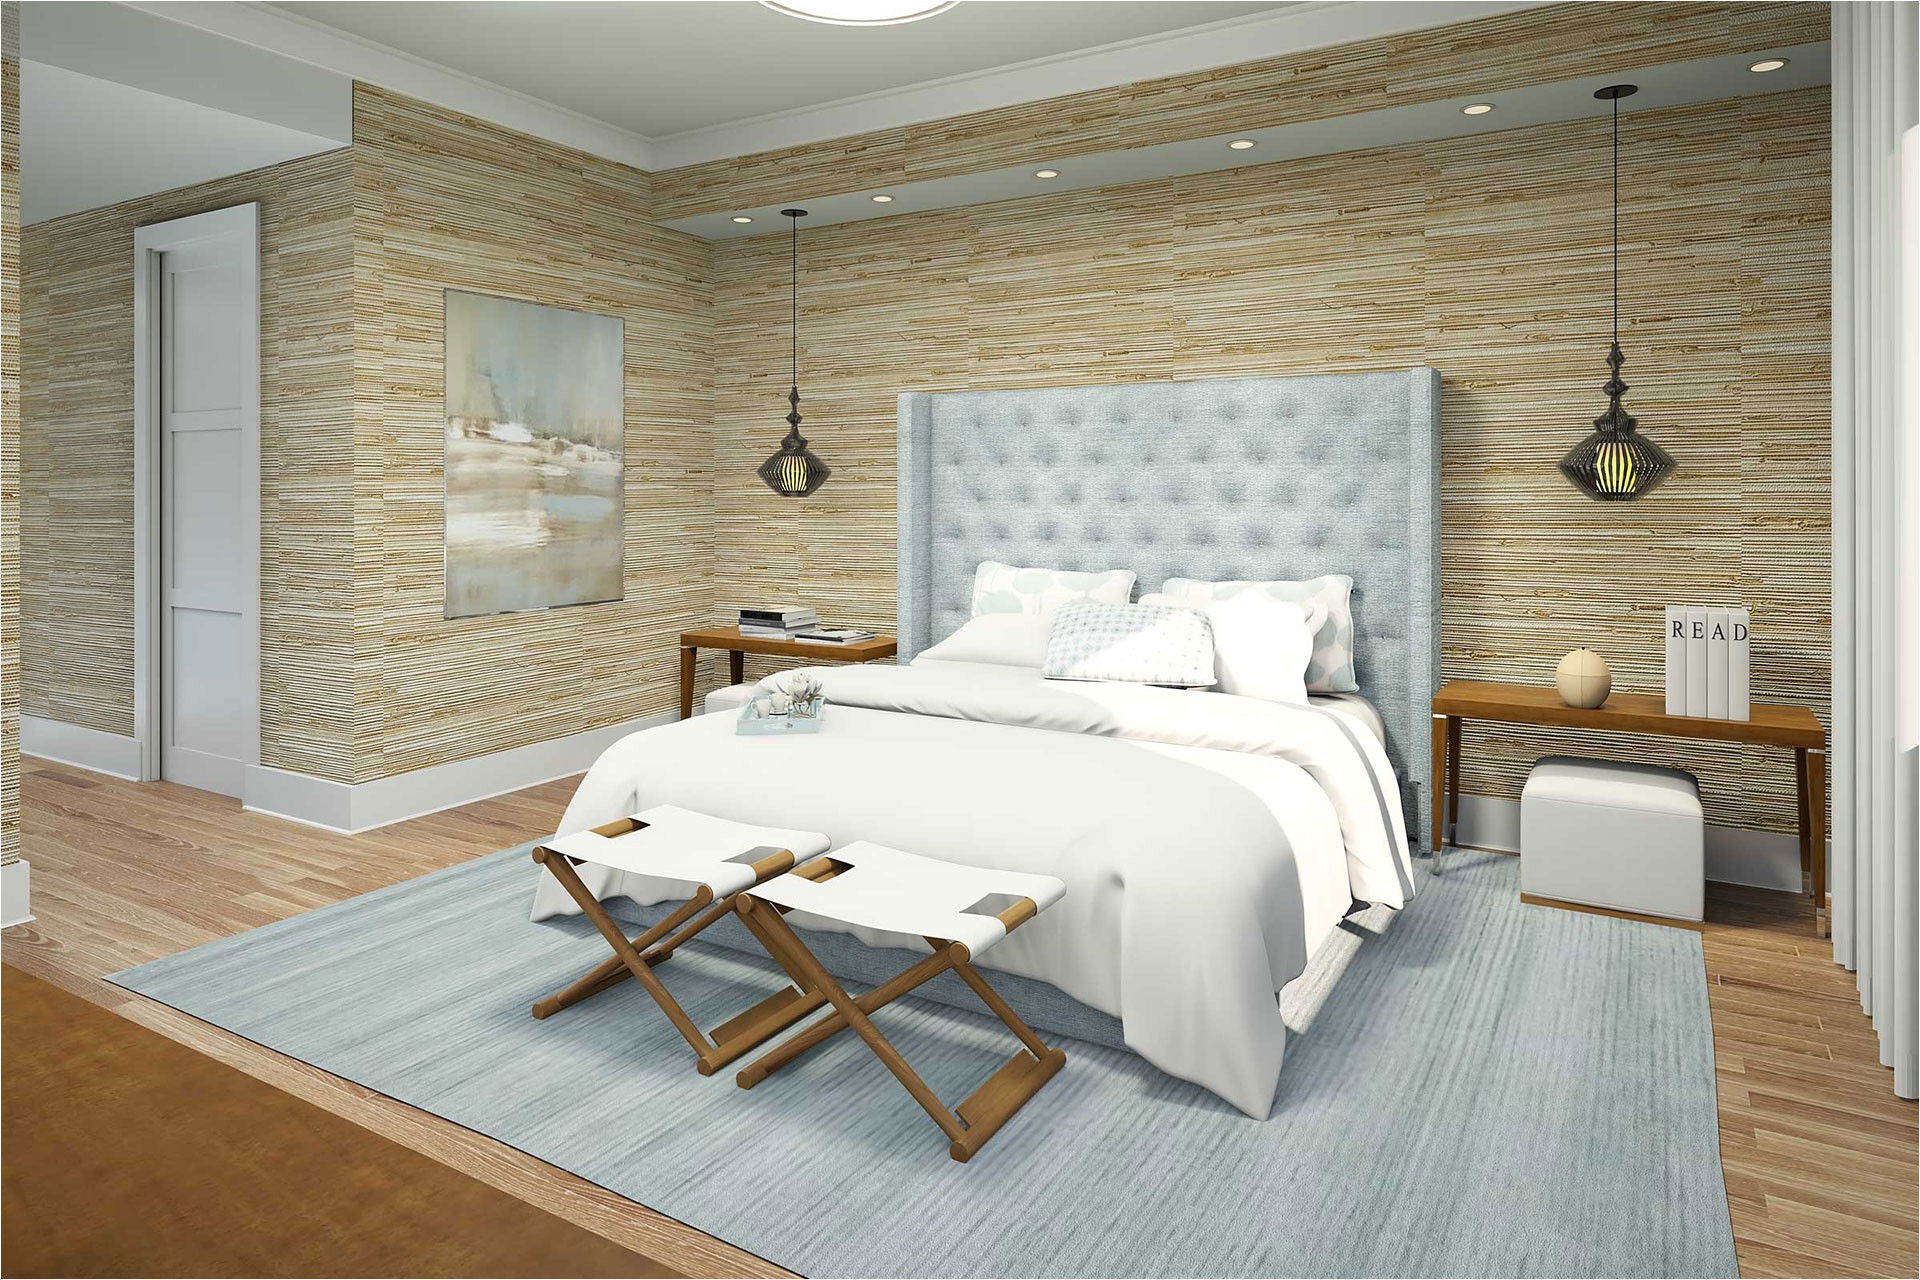 Murphy Bed Center Naples Fl Contact Naples Square for Florida Luxurious Properties Naples Square